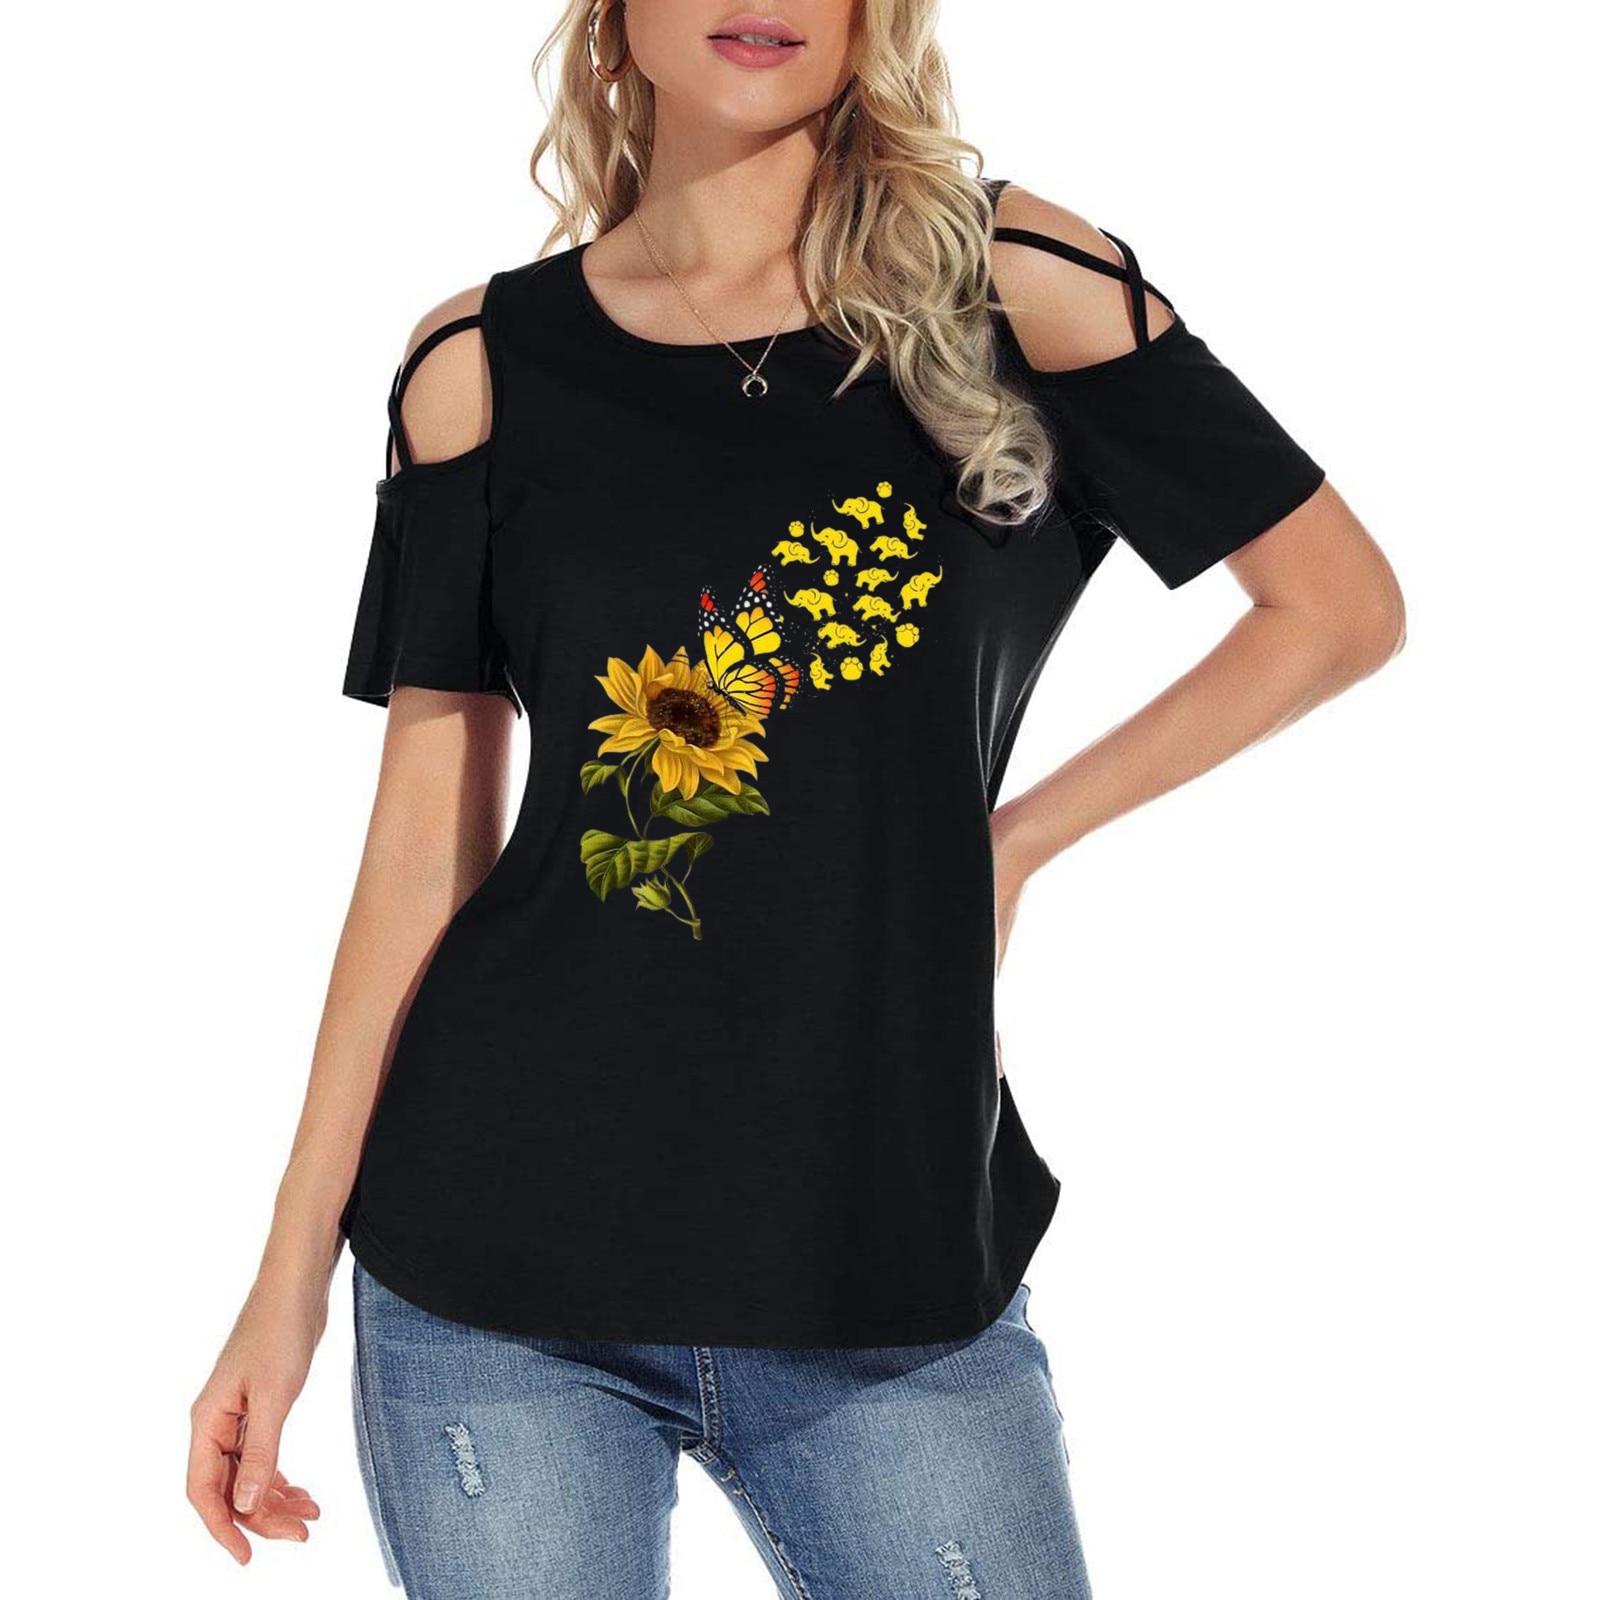 Stylish type Women Casual solid flower Printing Shirts with Short Sleeves Loose Tee Tops Tunic Blouse T-Shirt